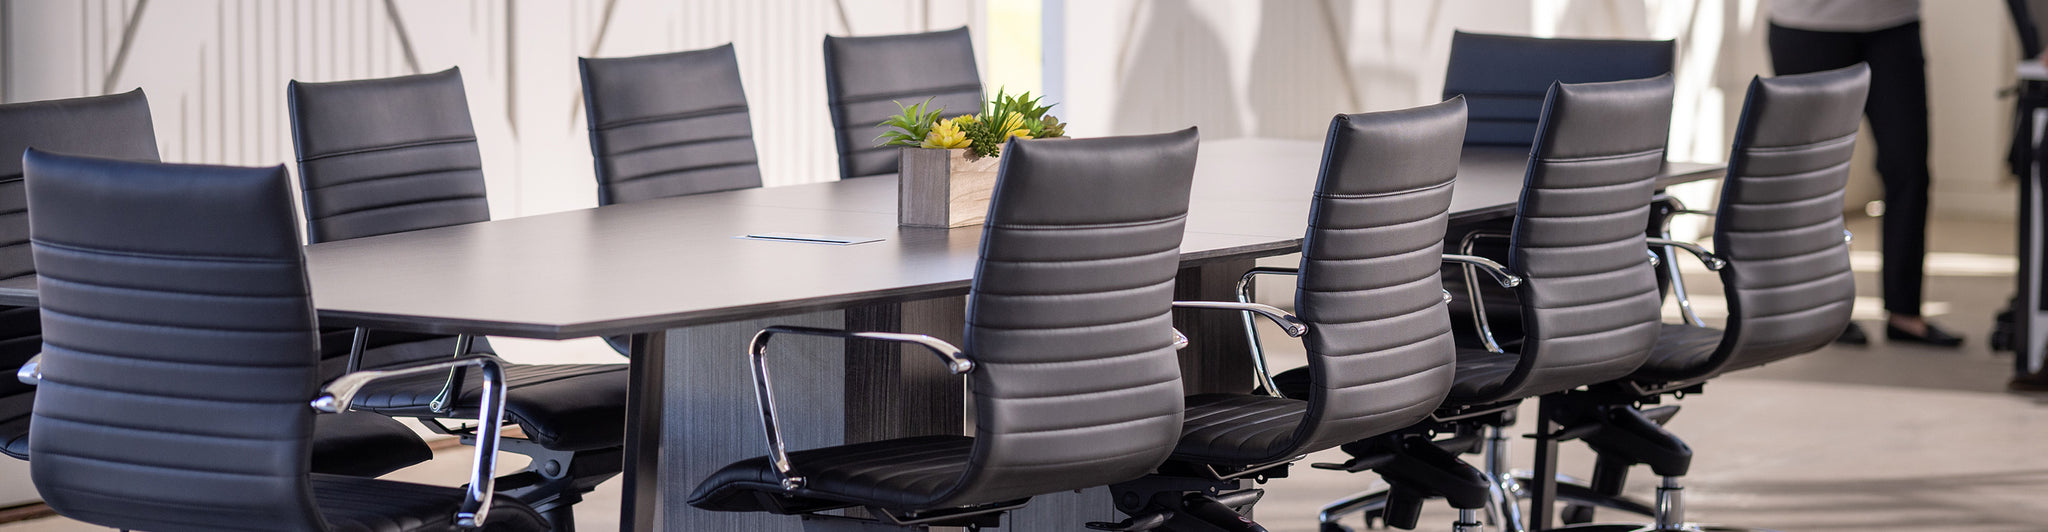 Executive & Conference Room Chairs